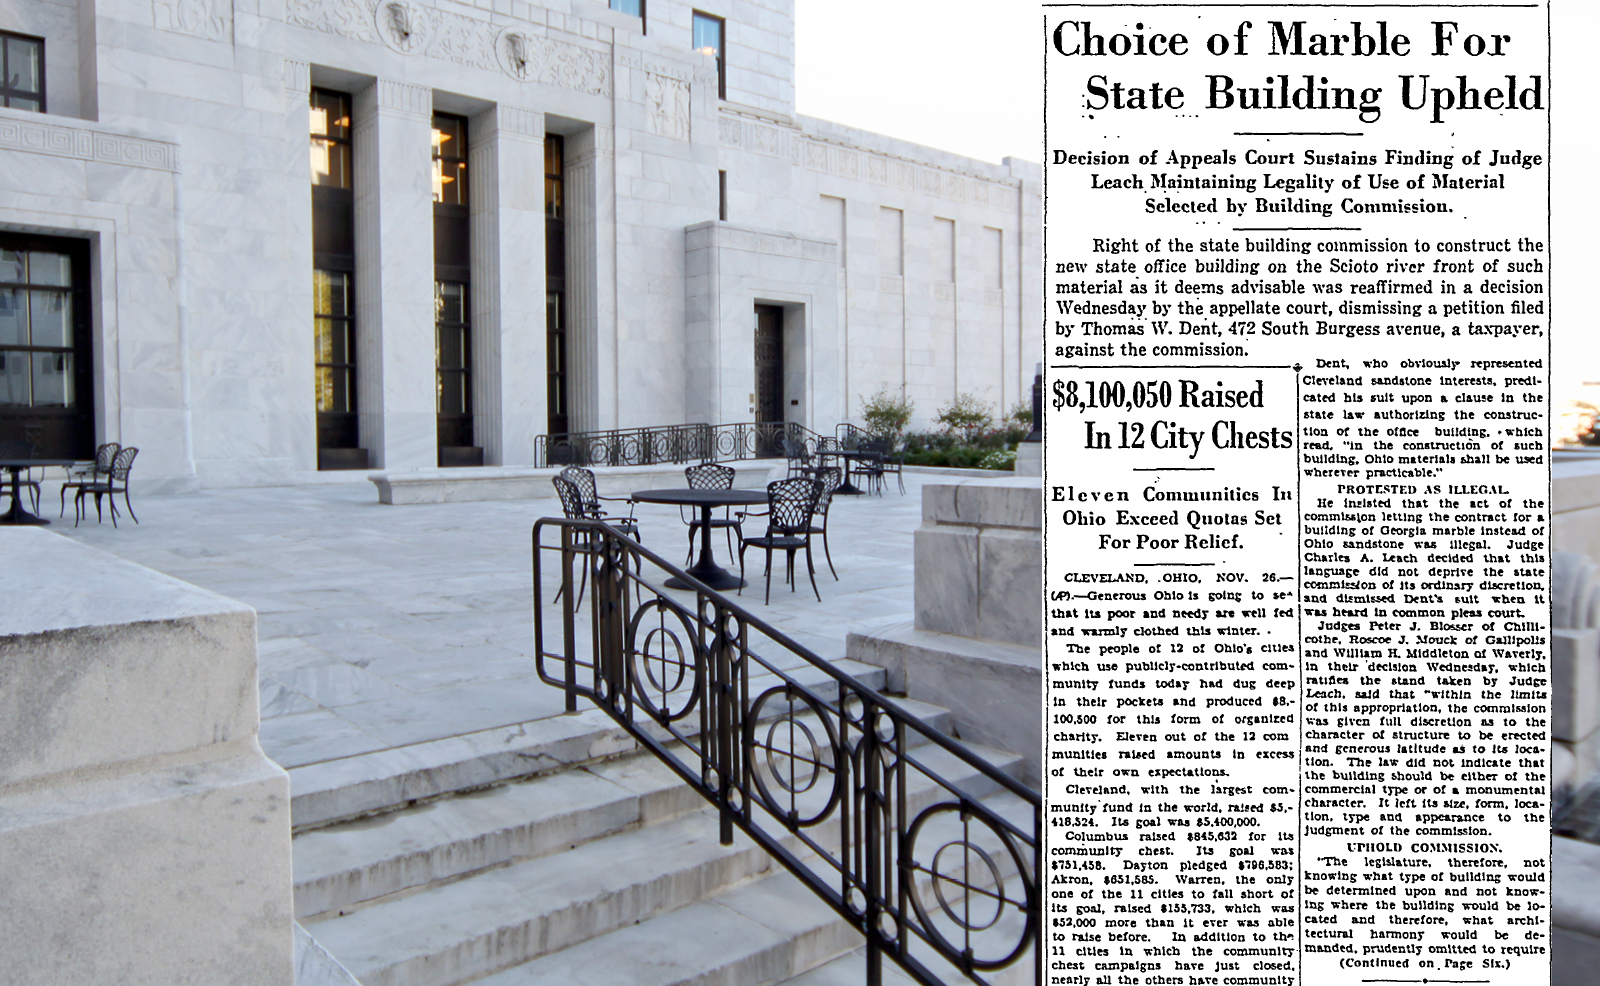 Image of north plaza of the Thomas J. Moyer Ohio Judicial Center with several iron tables and chairs; alonside this is an image of a newspaper article of the appeals court's decision resulting from a taxpayer lawsuit related to the use of Georgia marble in the construction of the building